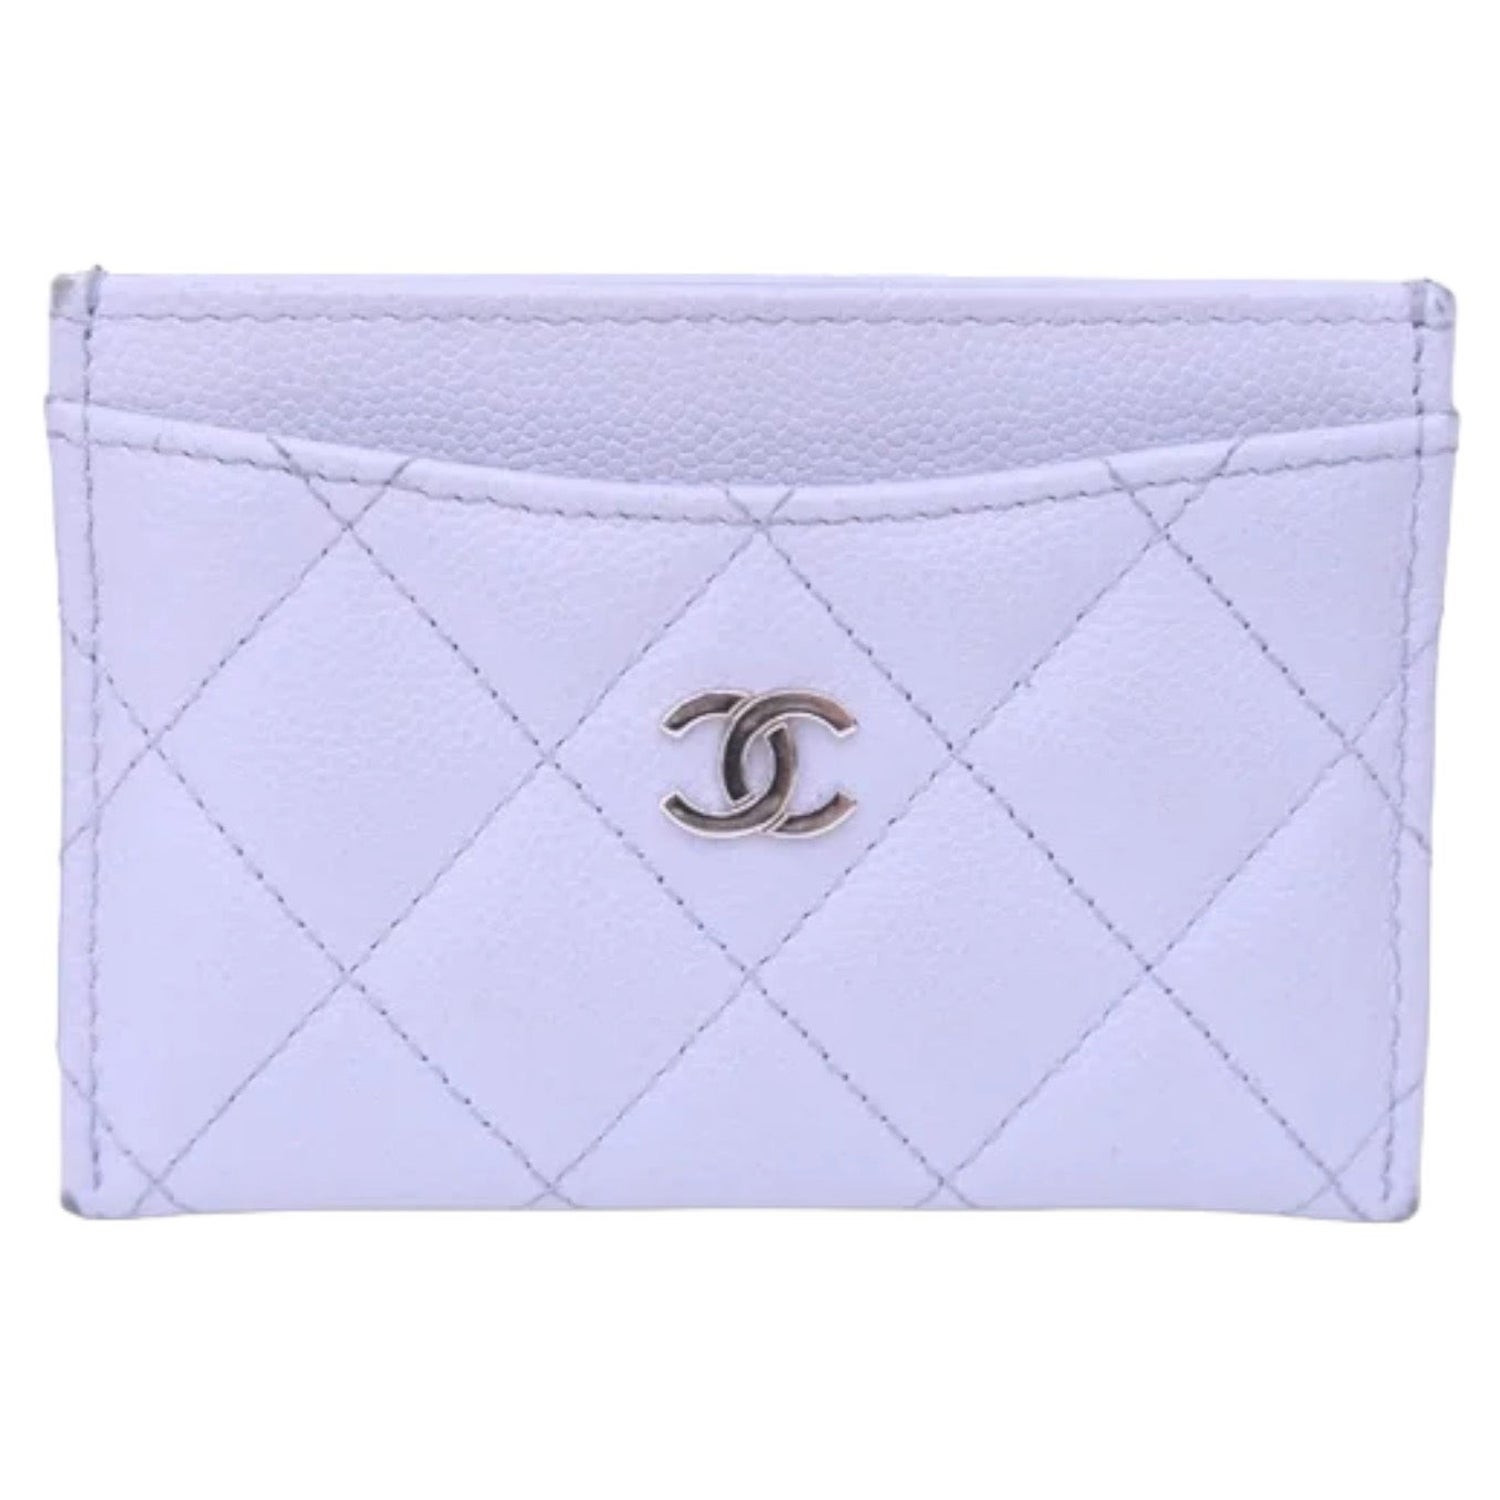 Chanel Wallets 2021 - 8 For Sale on 1stDibs